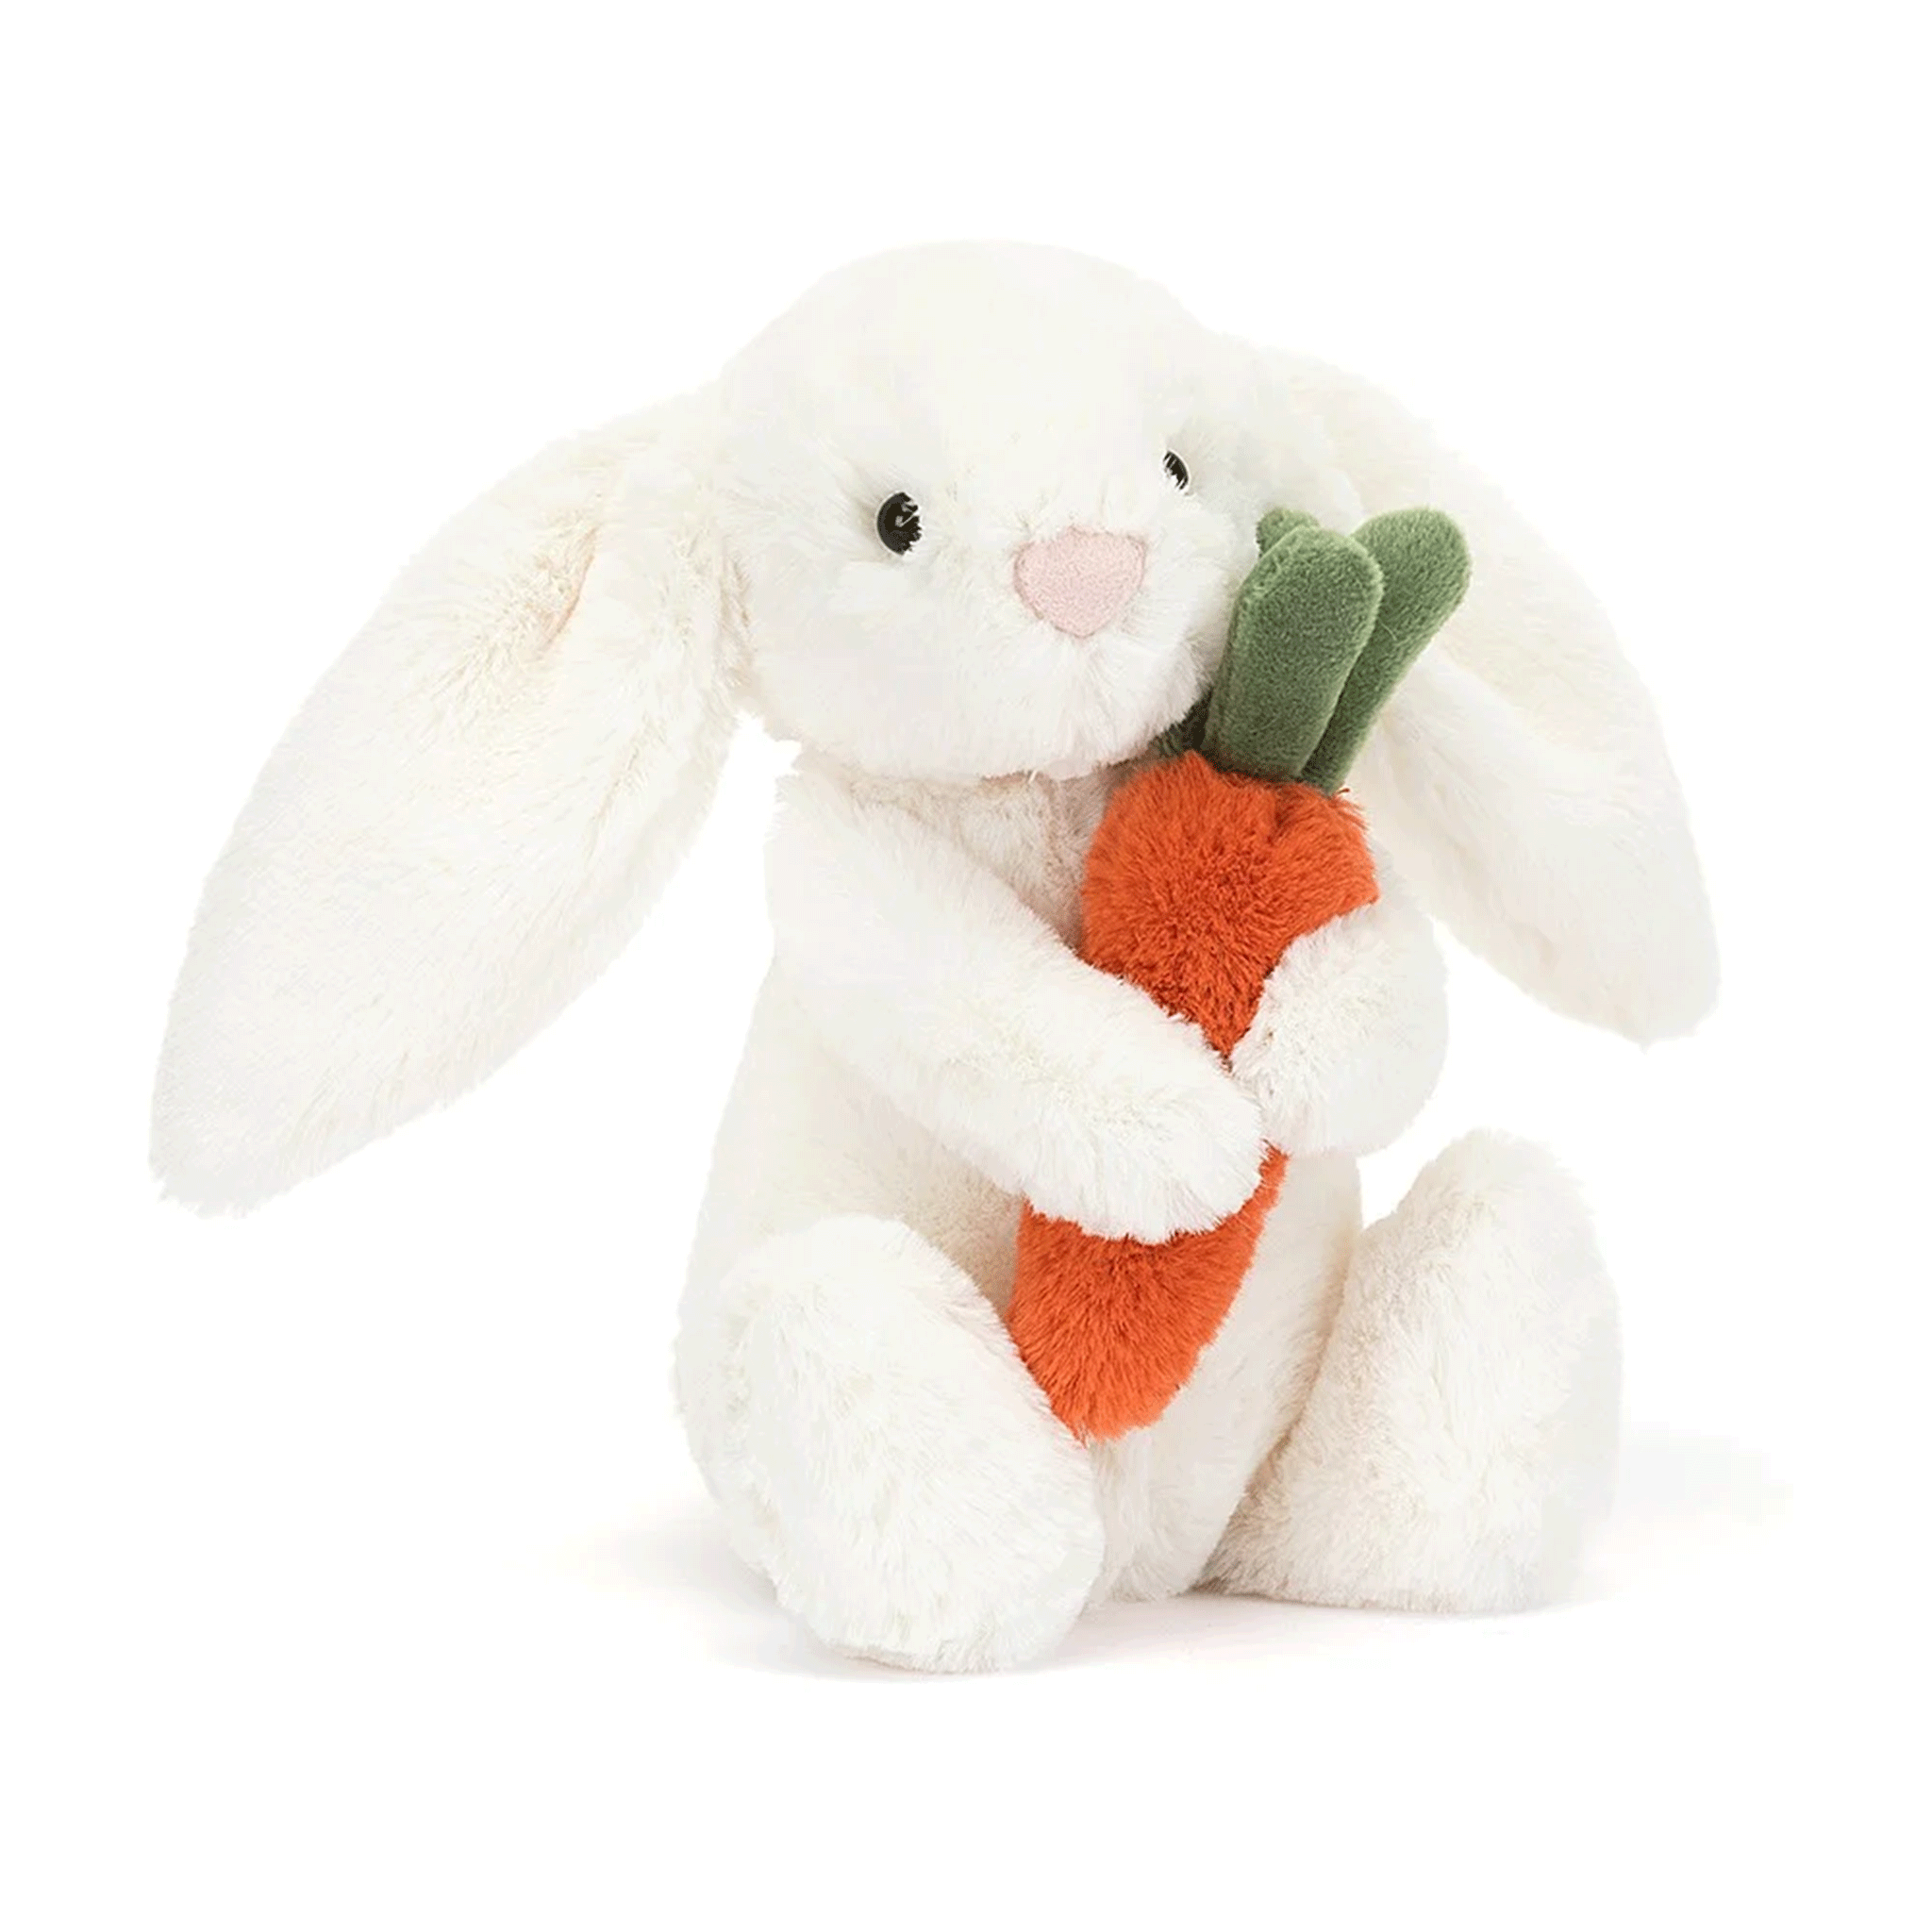 On a white background is a white stuffed toy bunny with long floppy ears and holding an orange stuffed toy carrot. 